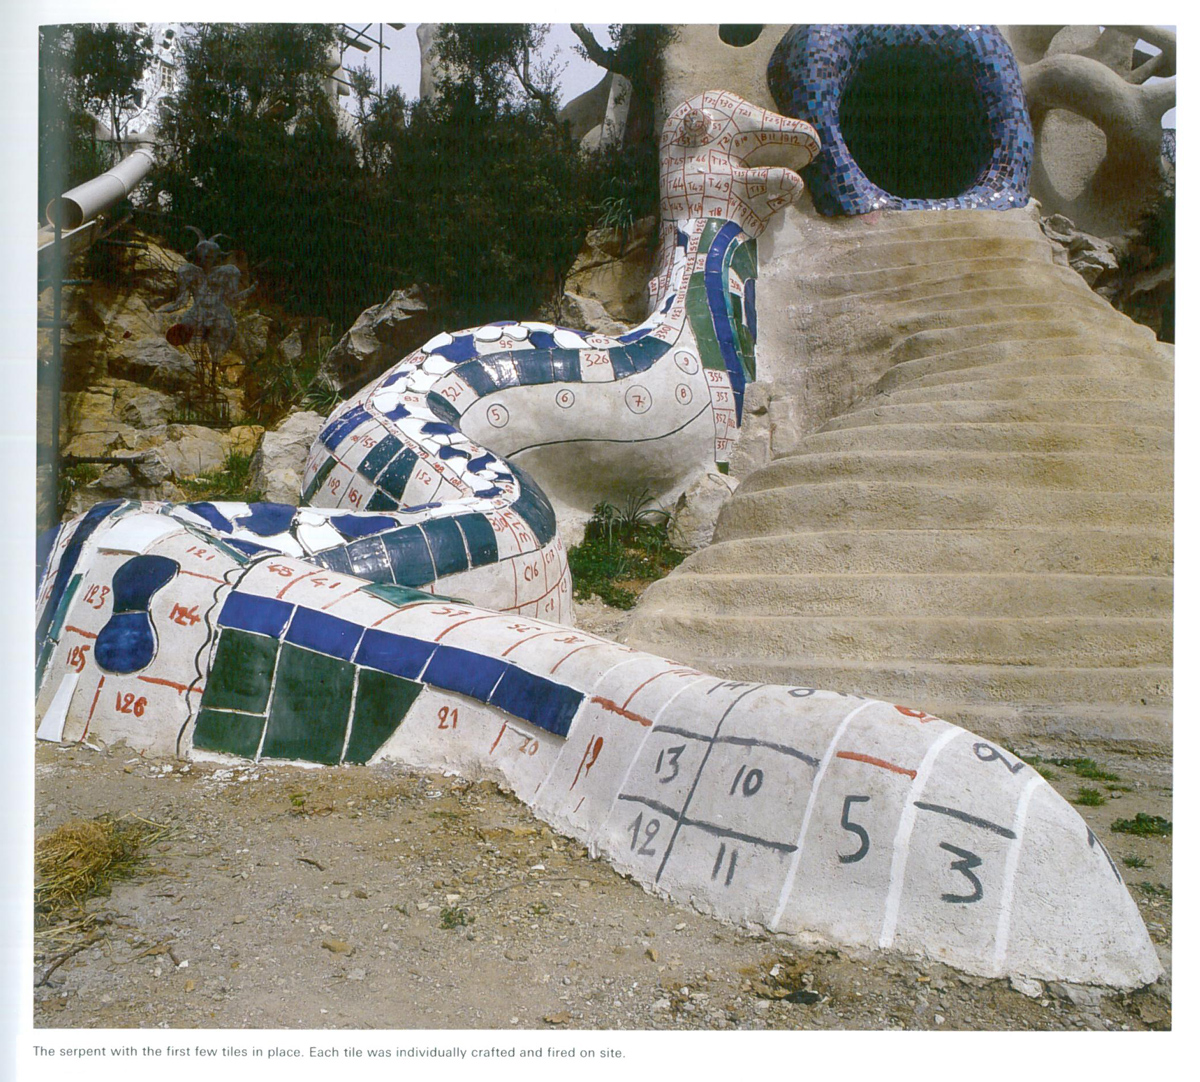 Detail of Serpent by the waterfall of the High Priestess, under construction. The first tiles have been affixed. Each tile was individually crafted and fired on site. Image courtesy of Il Fondazione Giardino Dei Tarocchi. 